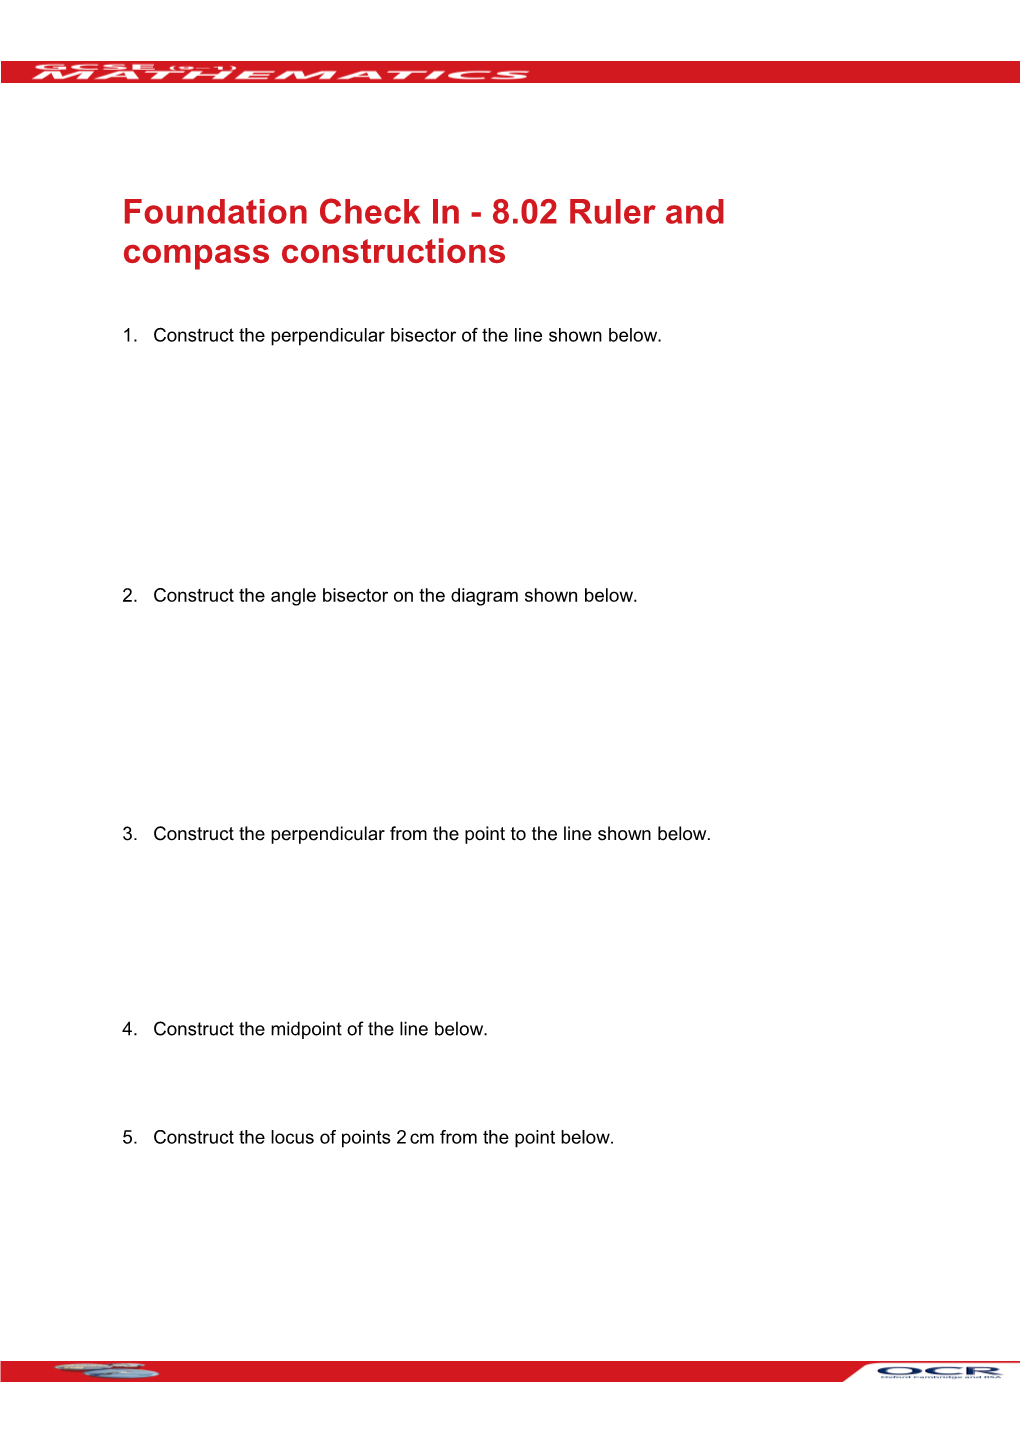 GCSE (9-1) Mathematics Ruler and Compass Constructions Check in Foundation